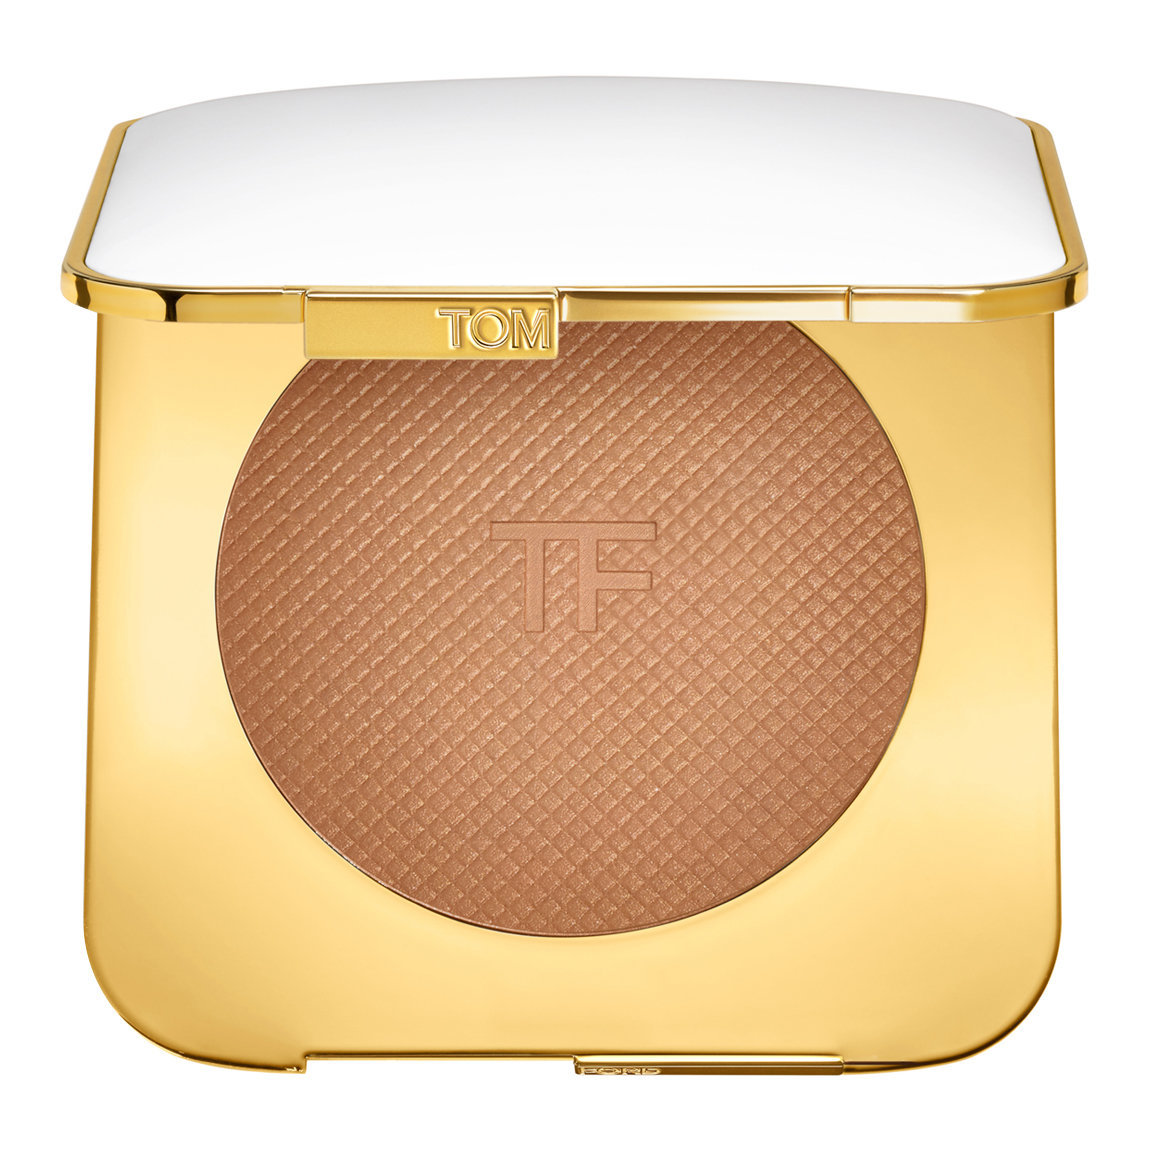 TOM FORD Soleil Glow Bronzer 02 Terra (Small) alternative view 1 - product swatch.